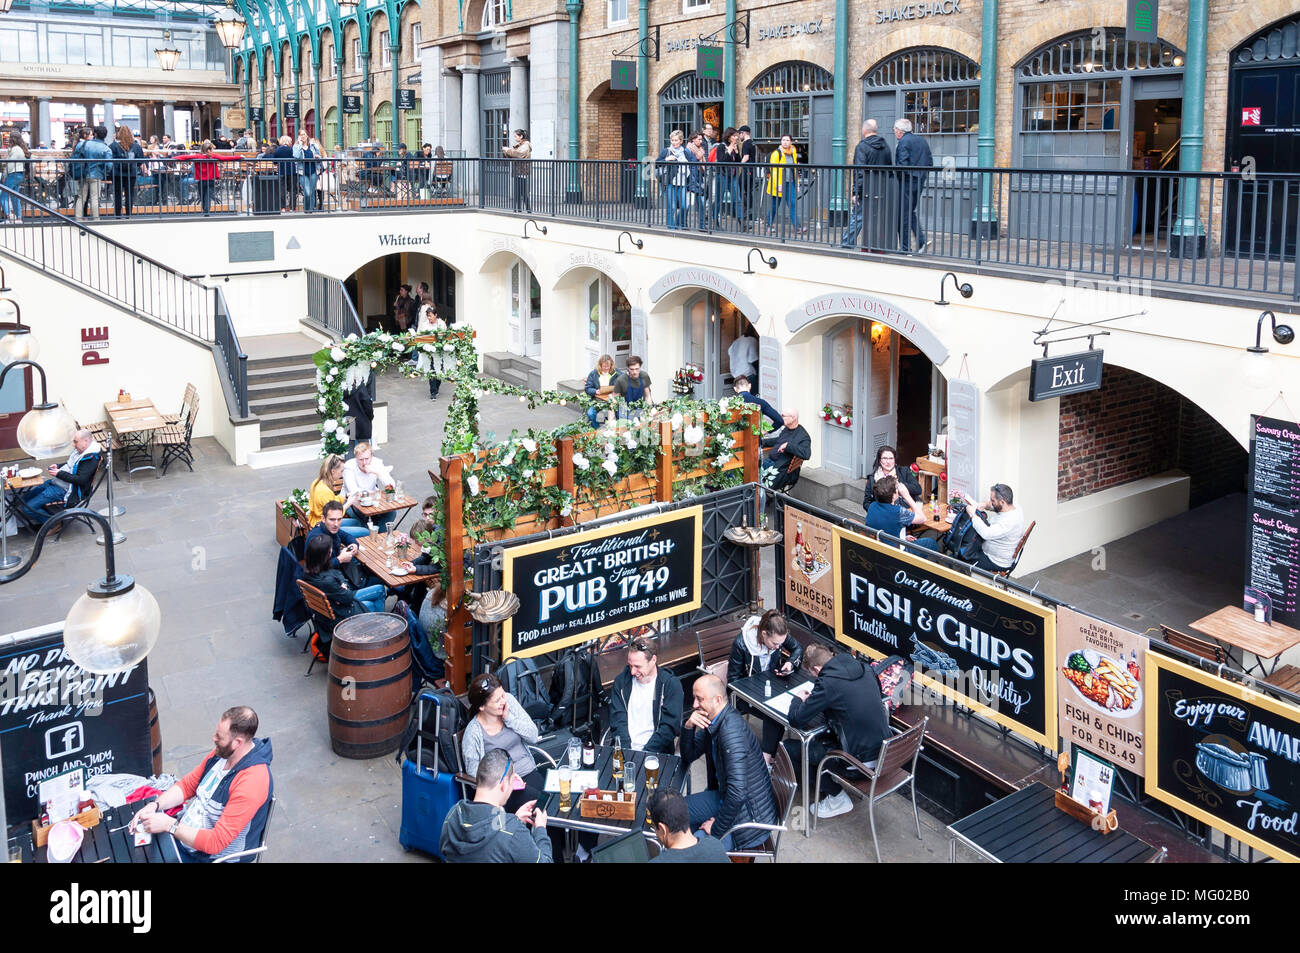 Punch & Judy Pub courtyard garden in Covent Garden Market, Covent Garden, City of Westminster, London, England, United Kingdom Stock Photo